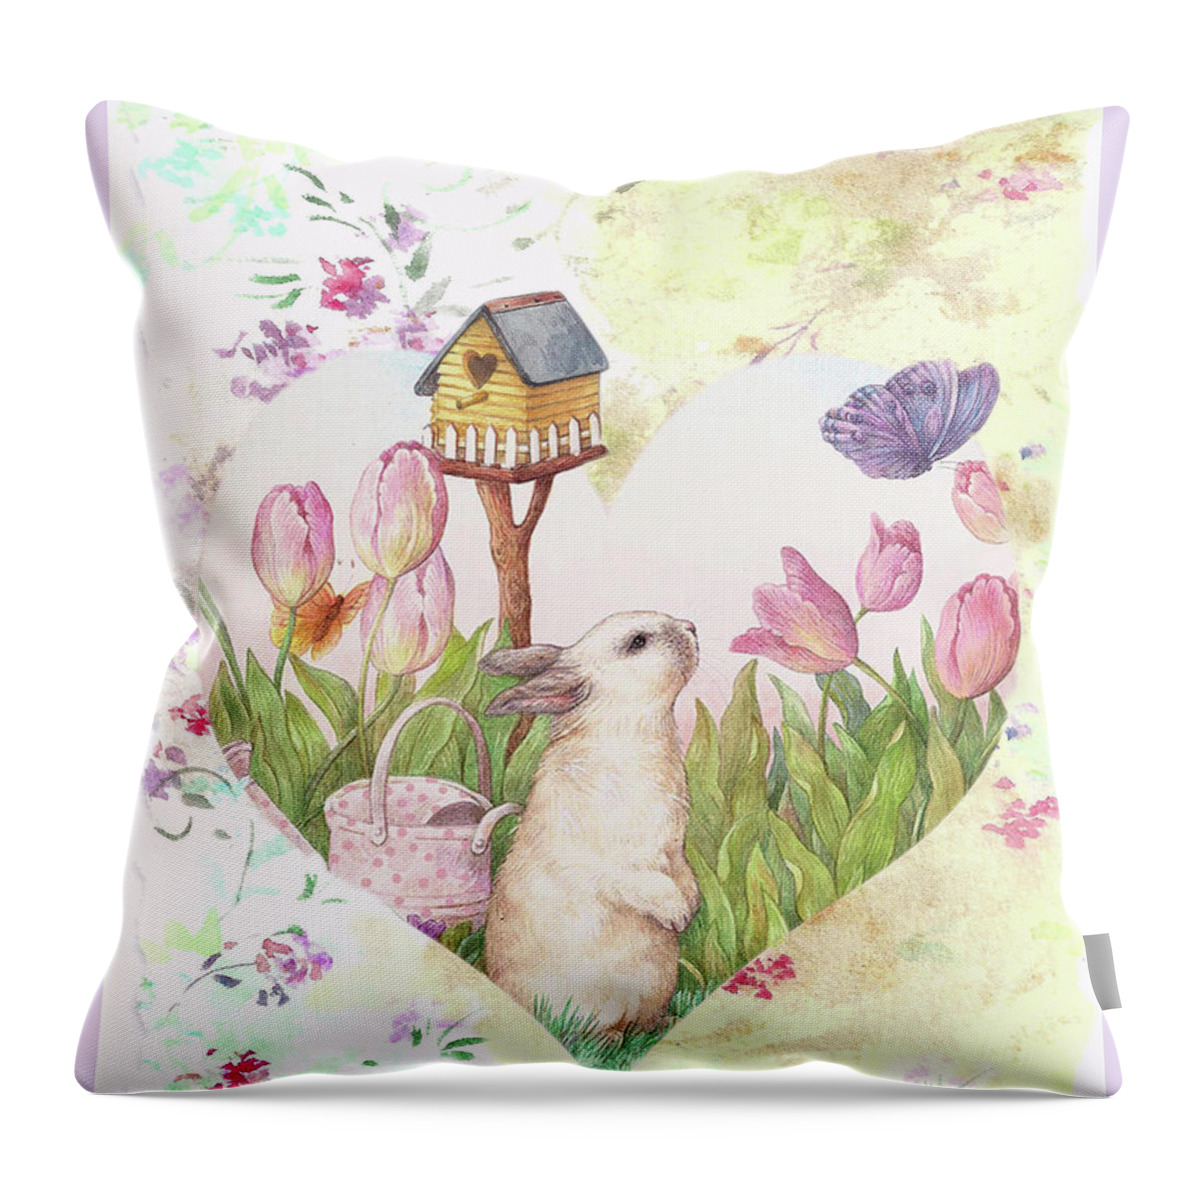 Soft Nursery Wall Art Throw Pillow featuring the painting Sweet Heart Bunny and Butterfly by Judith Cheng